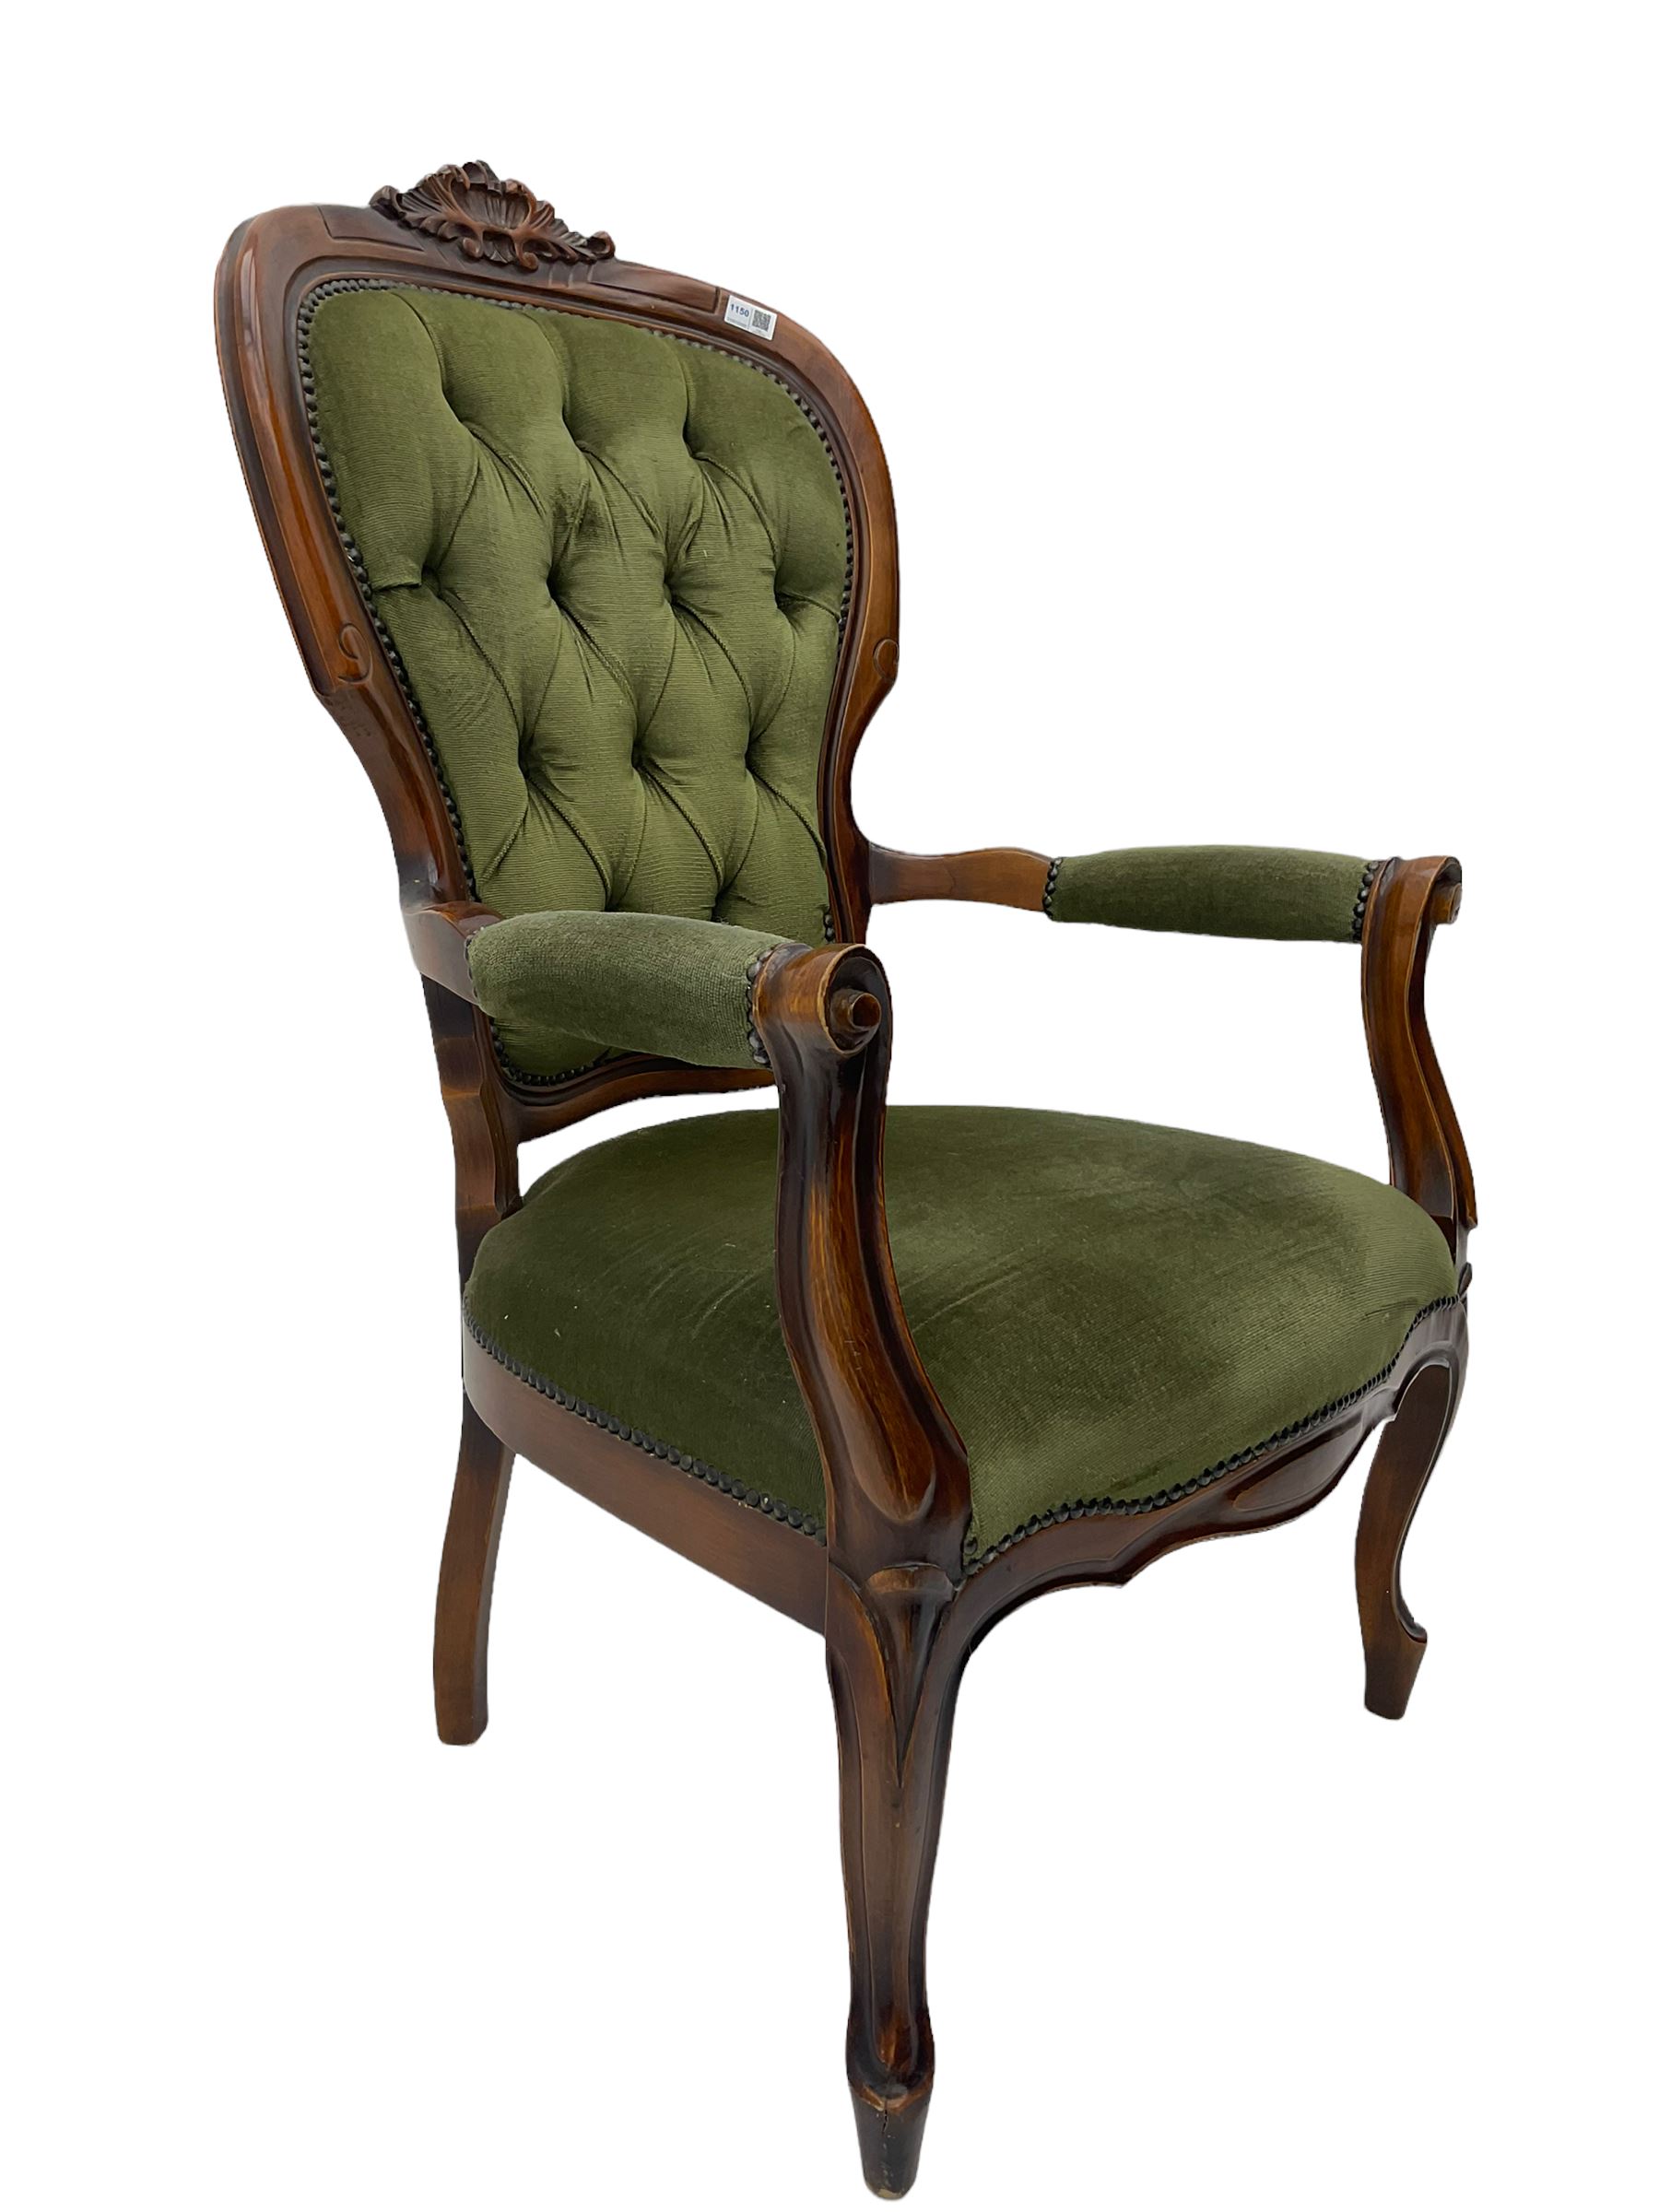 Victorian style stained beech armchair - Image 5 of 6